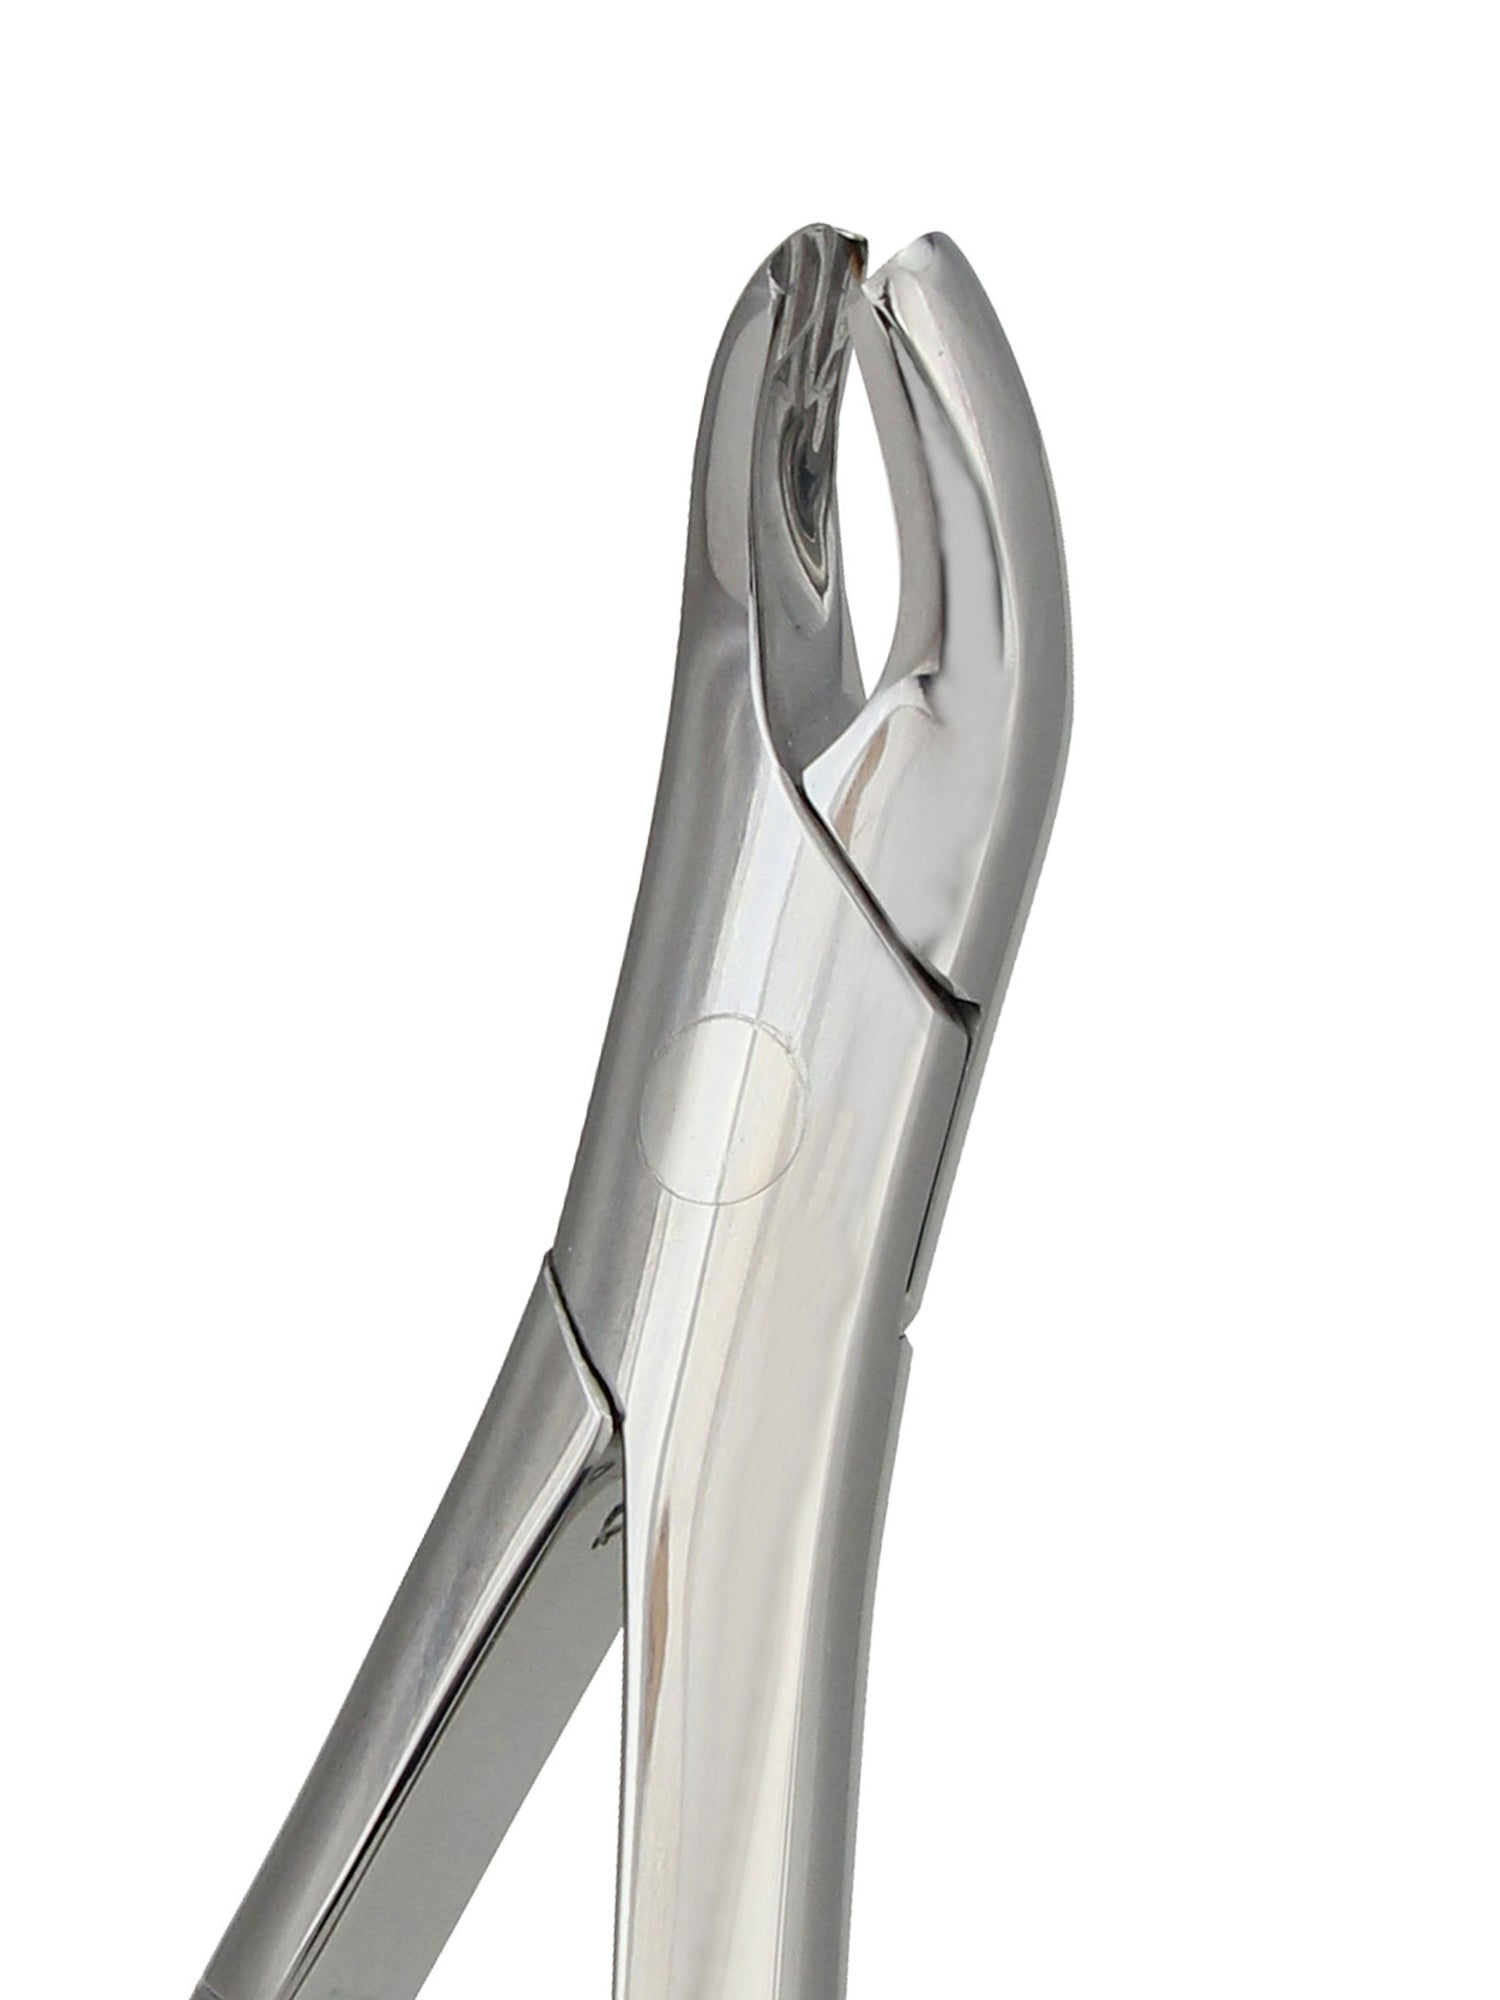 Extraction Forceps 18R